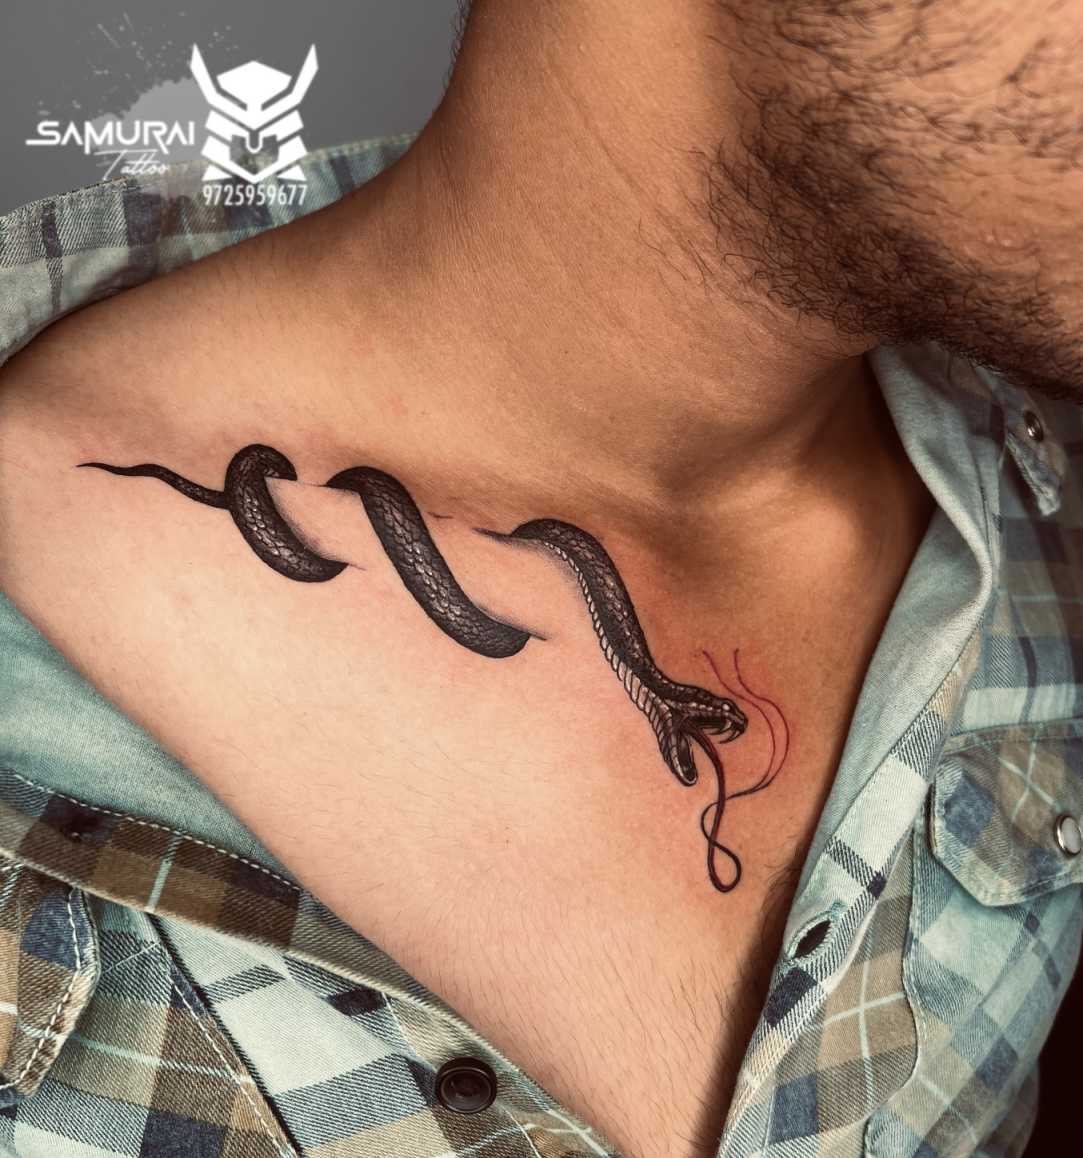 Tattoo uploaded by Vipul Chaudhary • Snake tattoo design Snake